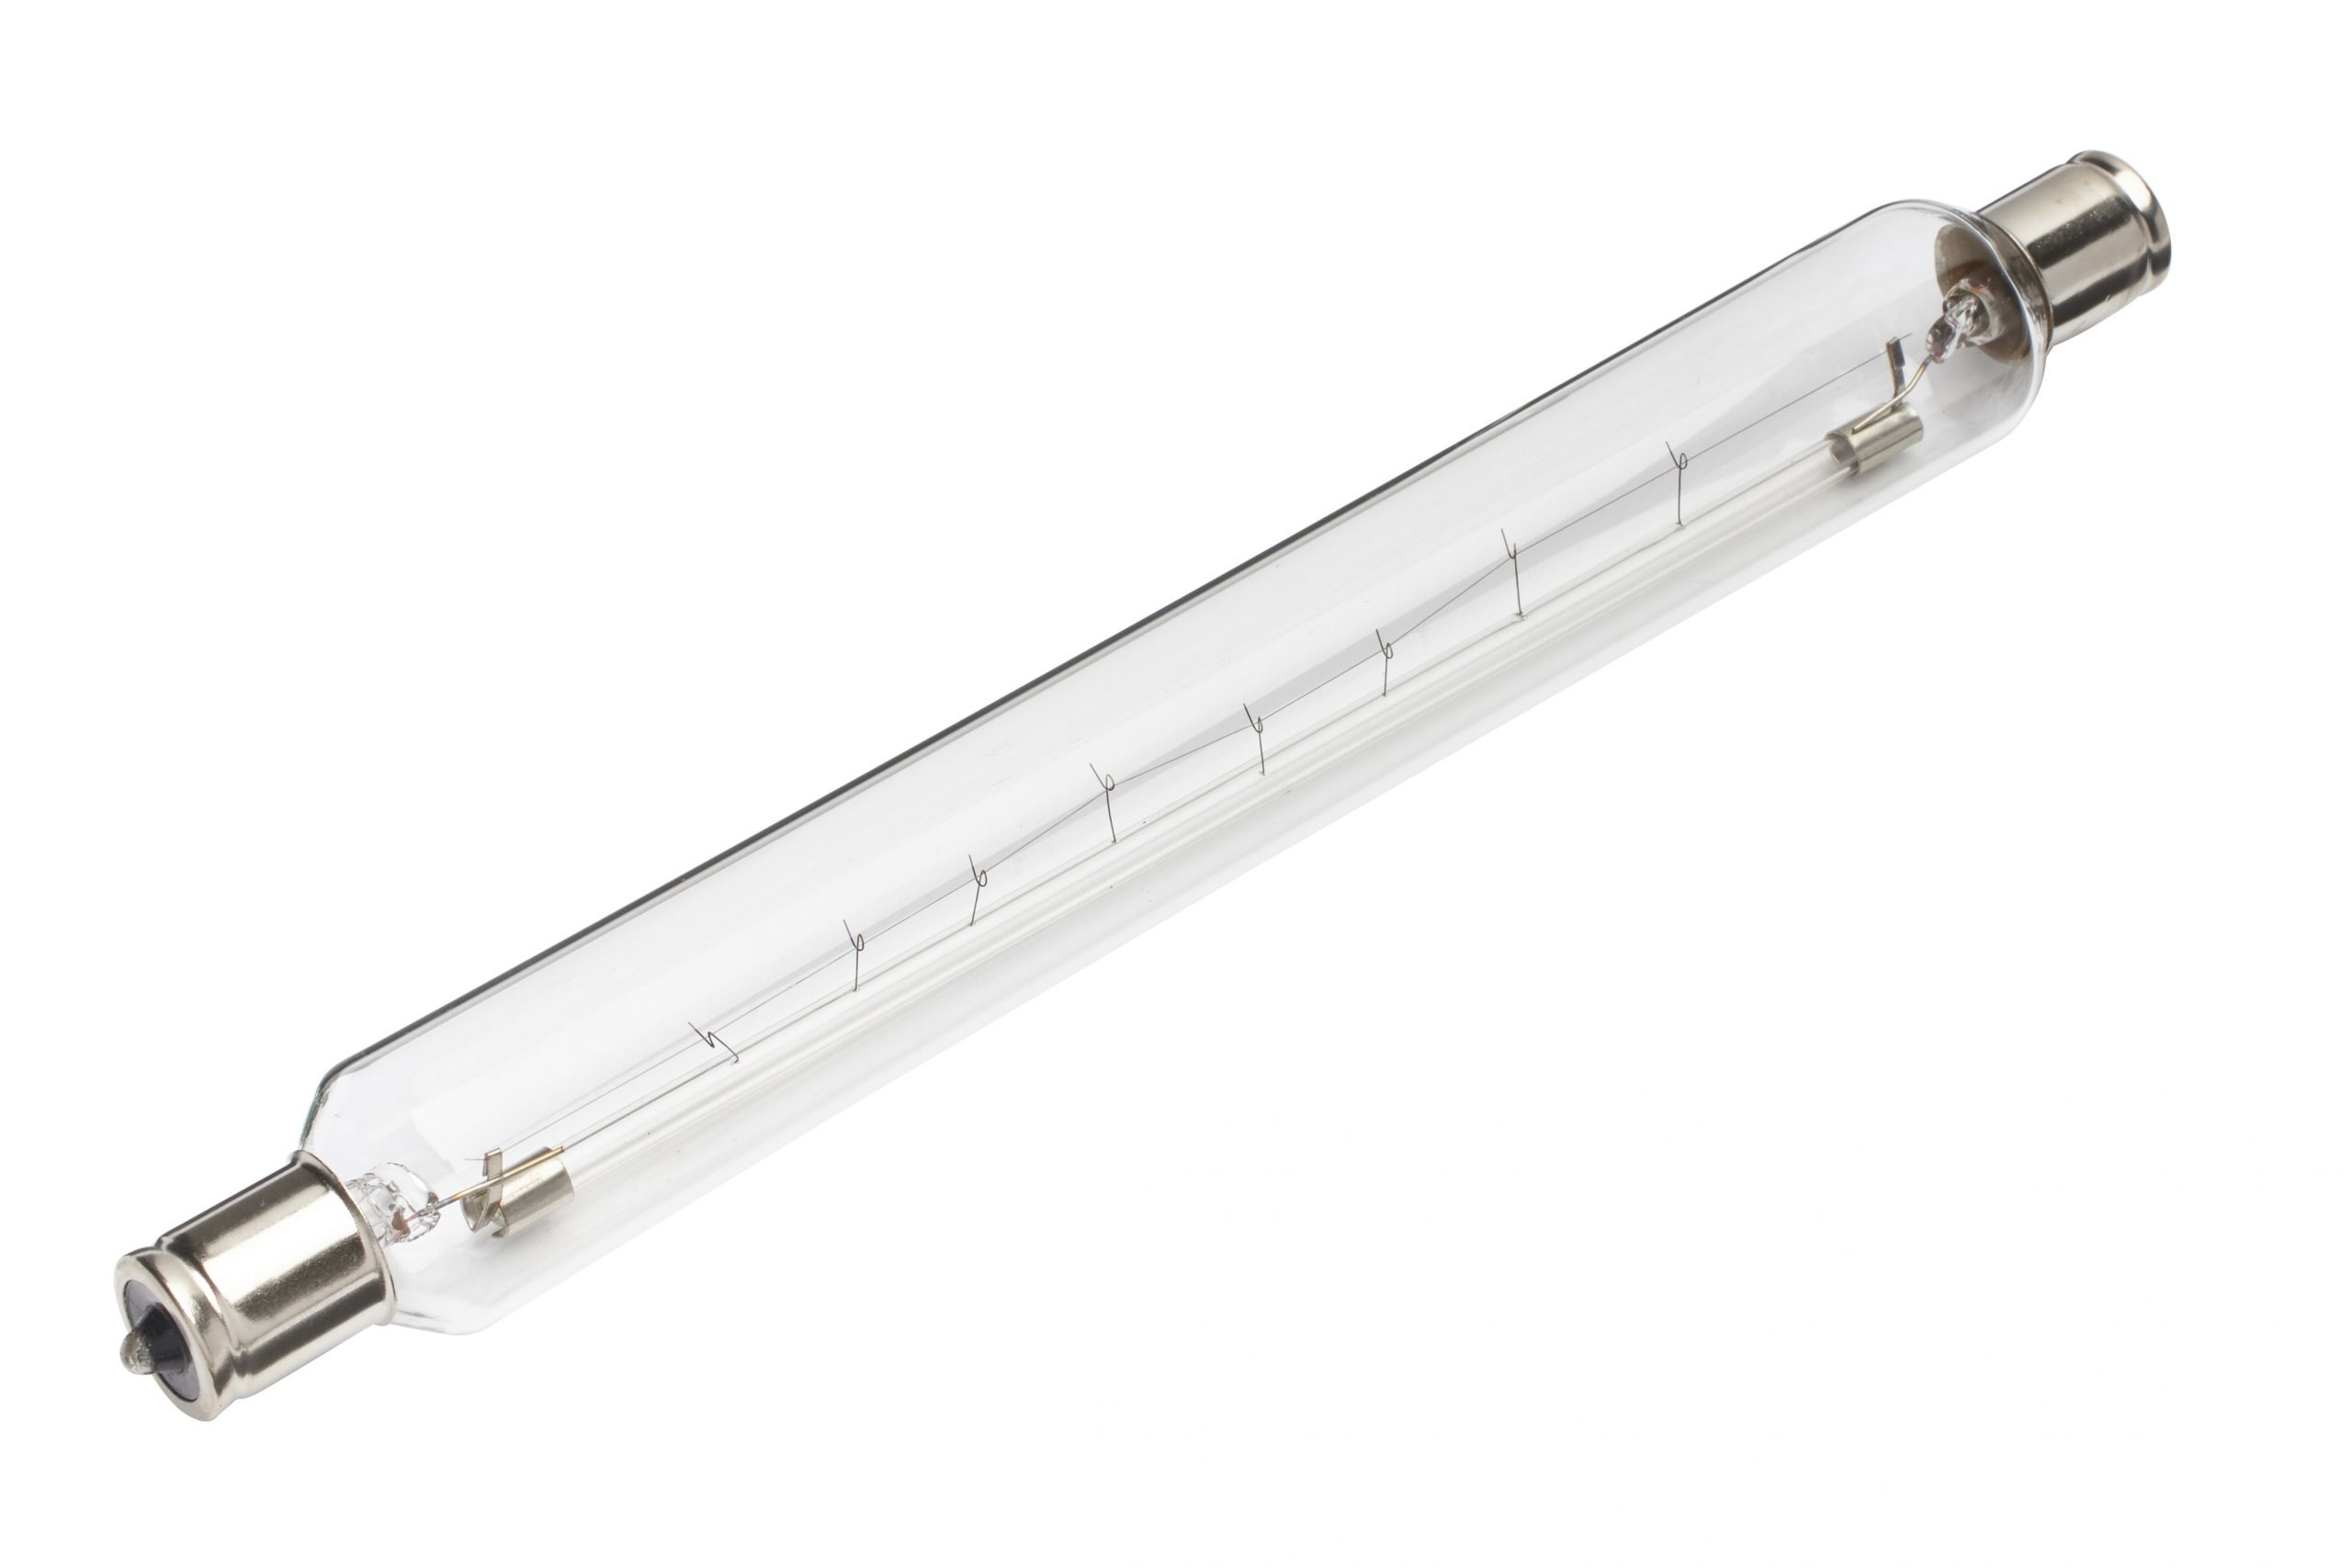 Strip light 60w Clear 221mm Double Ended Tubular Lamp S15 